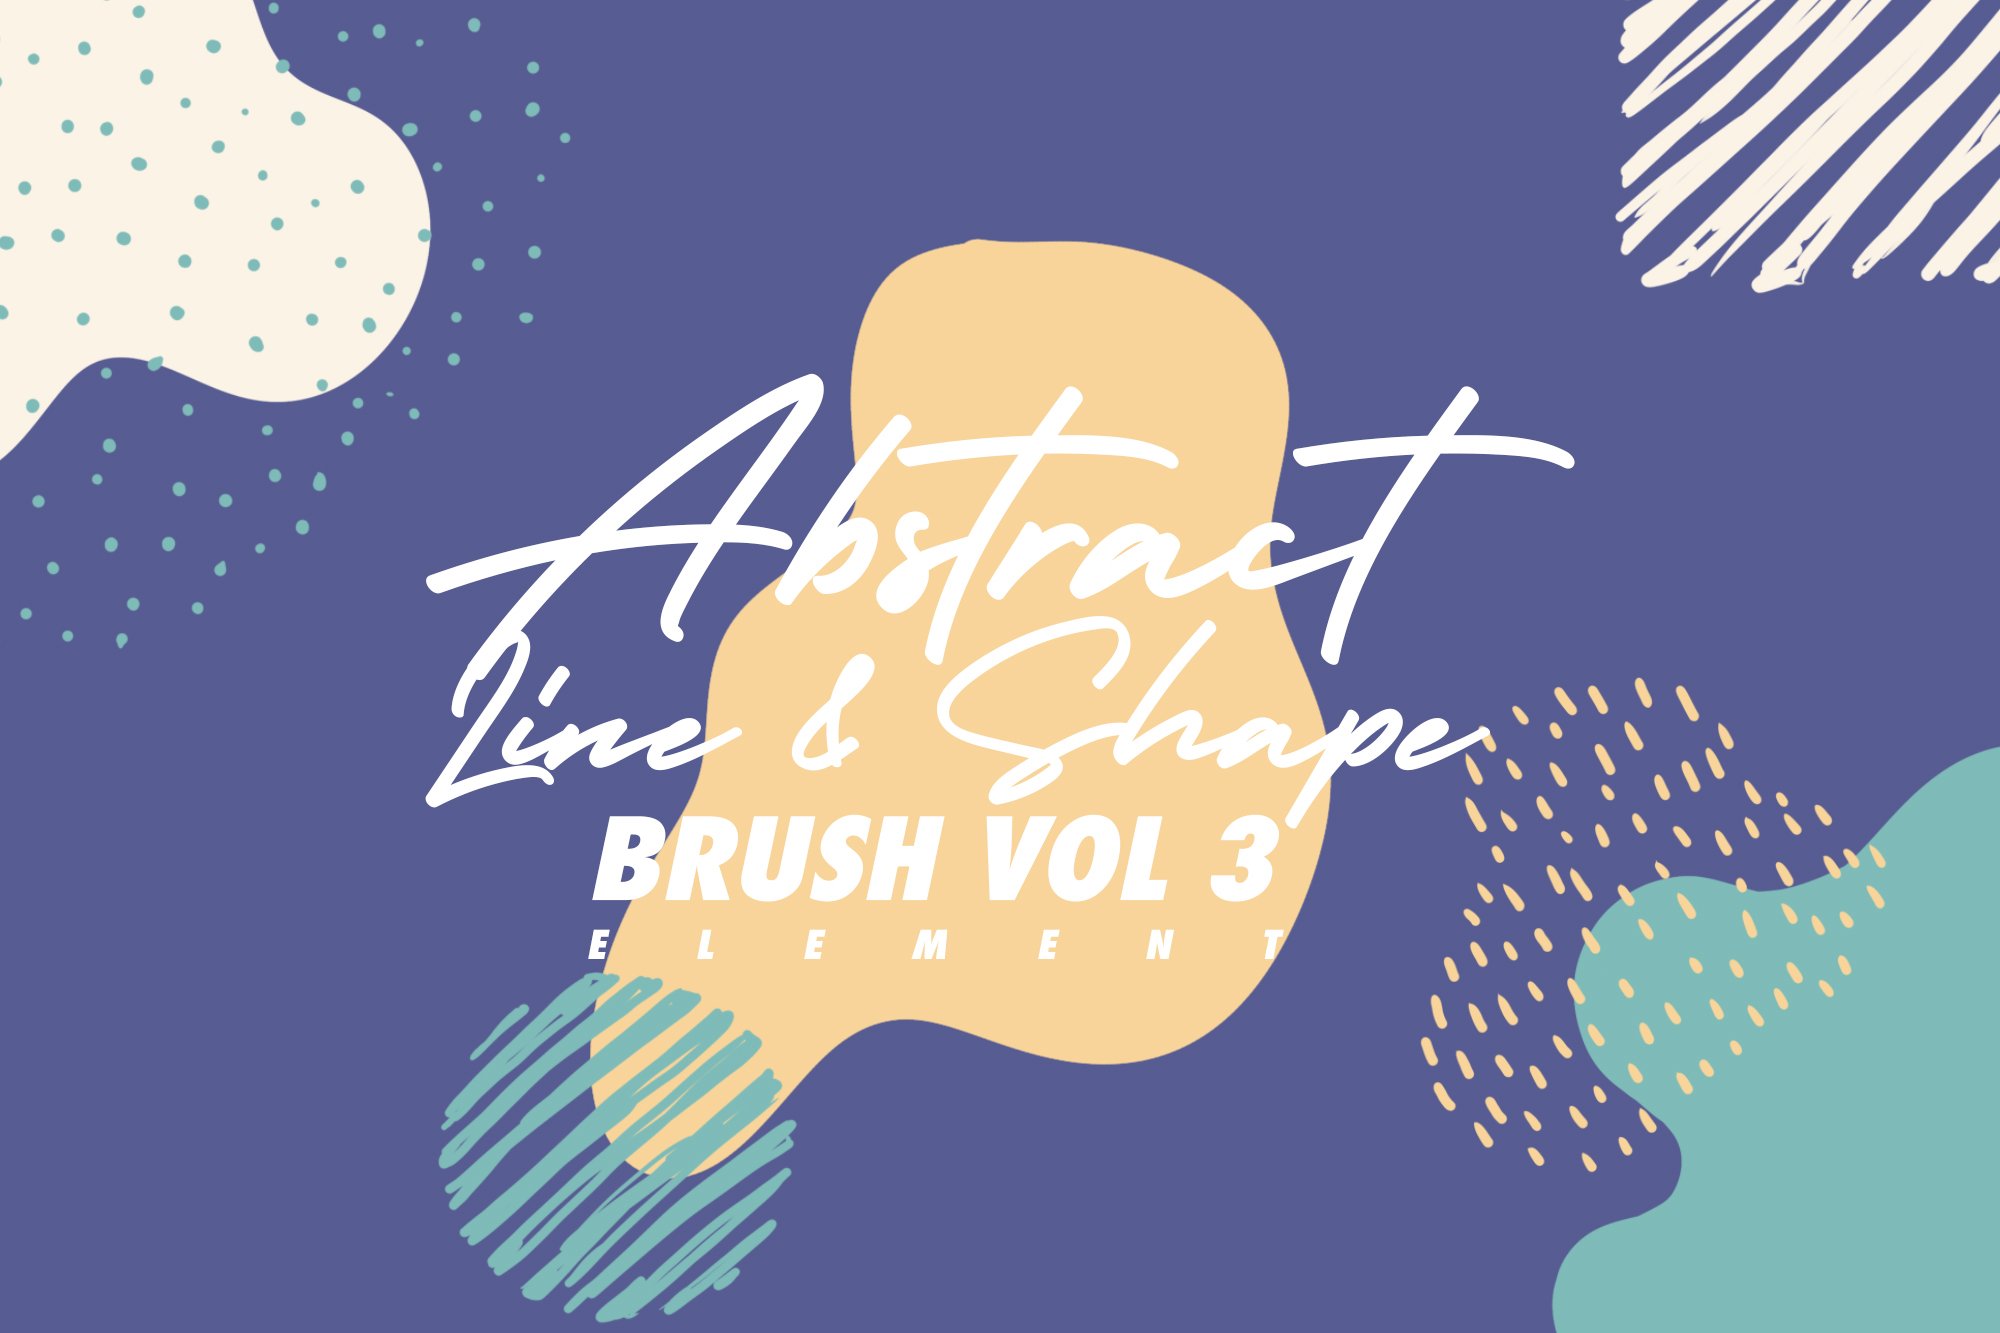 Abstract Line & Shape Brush Vol 3cover image.